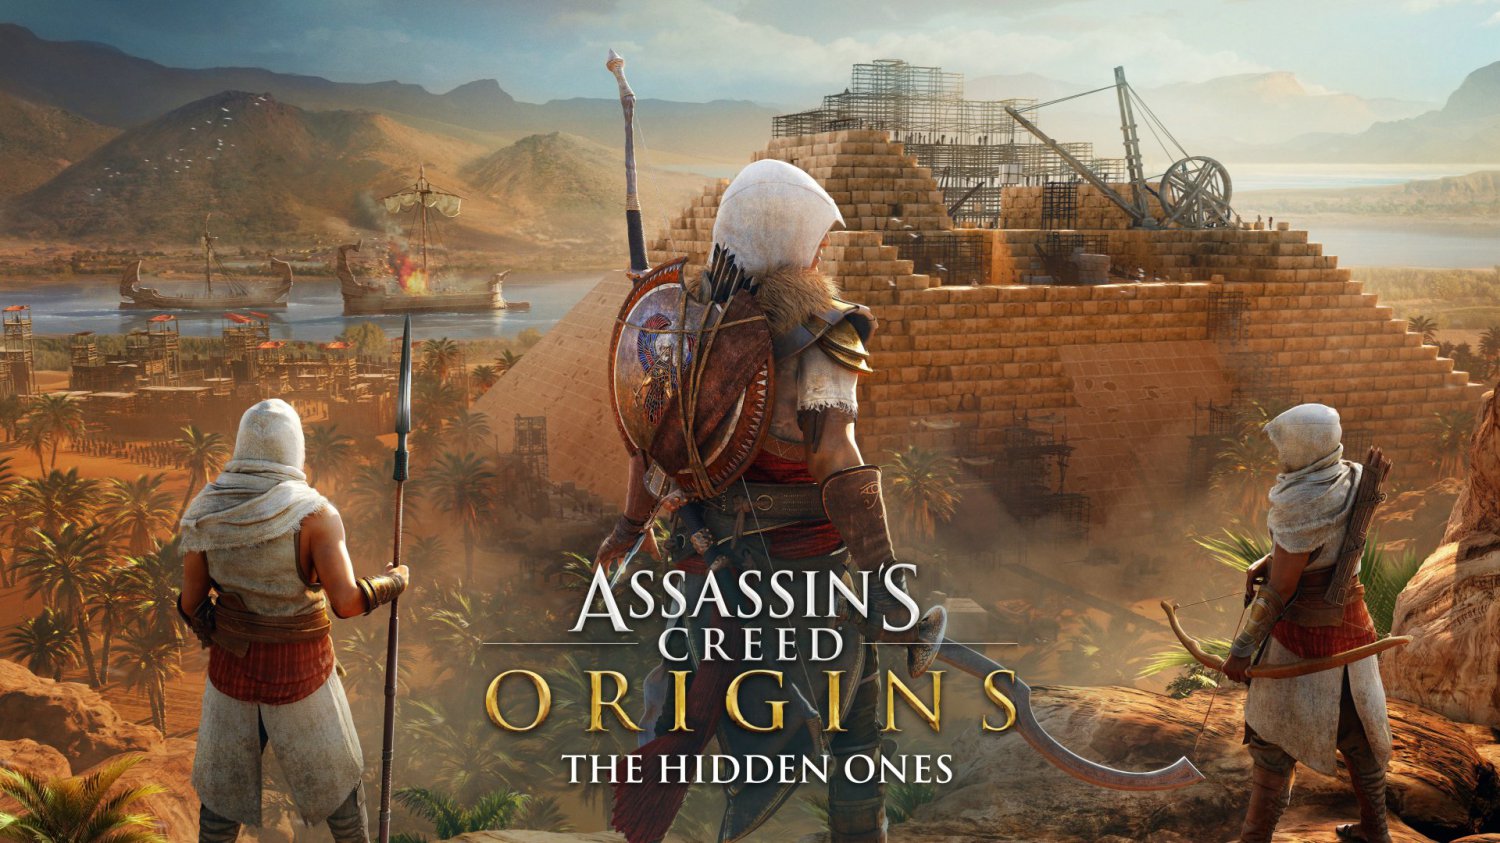 Assassin's Creed Origins Game  13"x19" (32cm/49cm) Polyester Fabric Poster